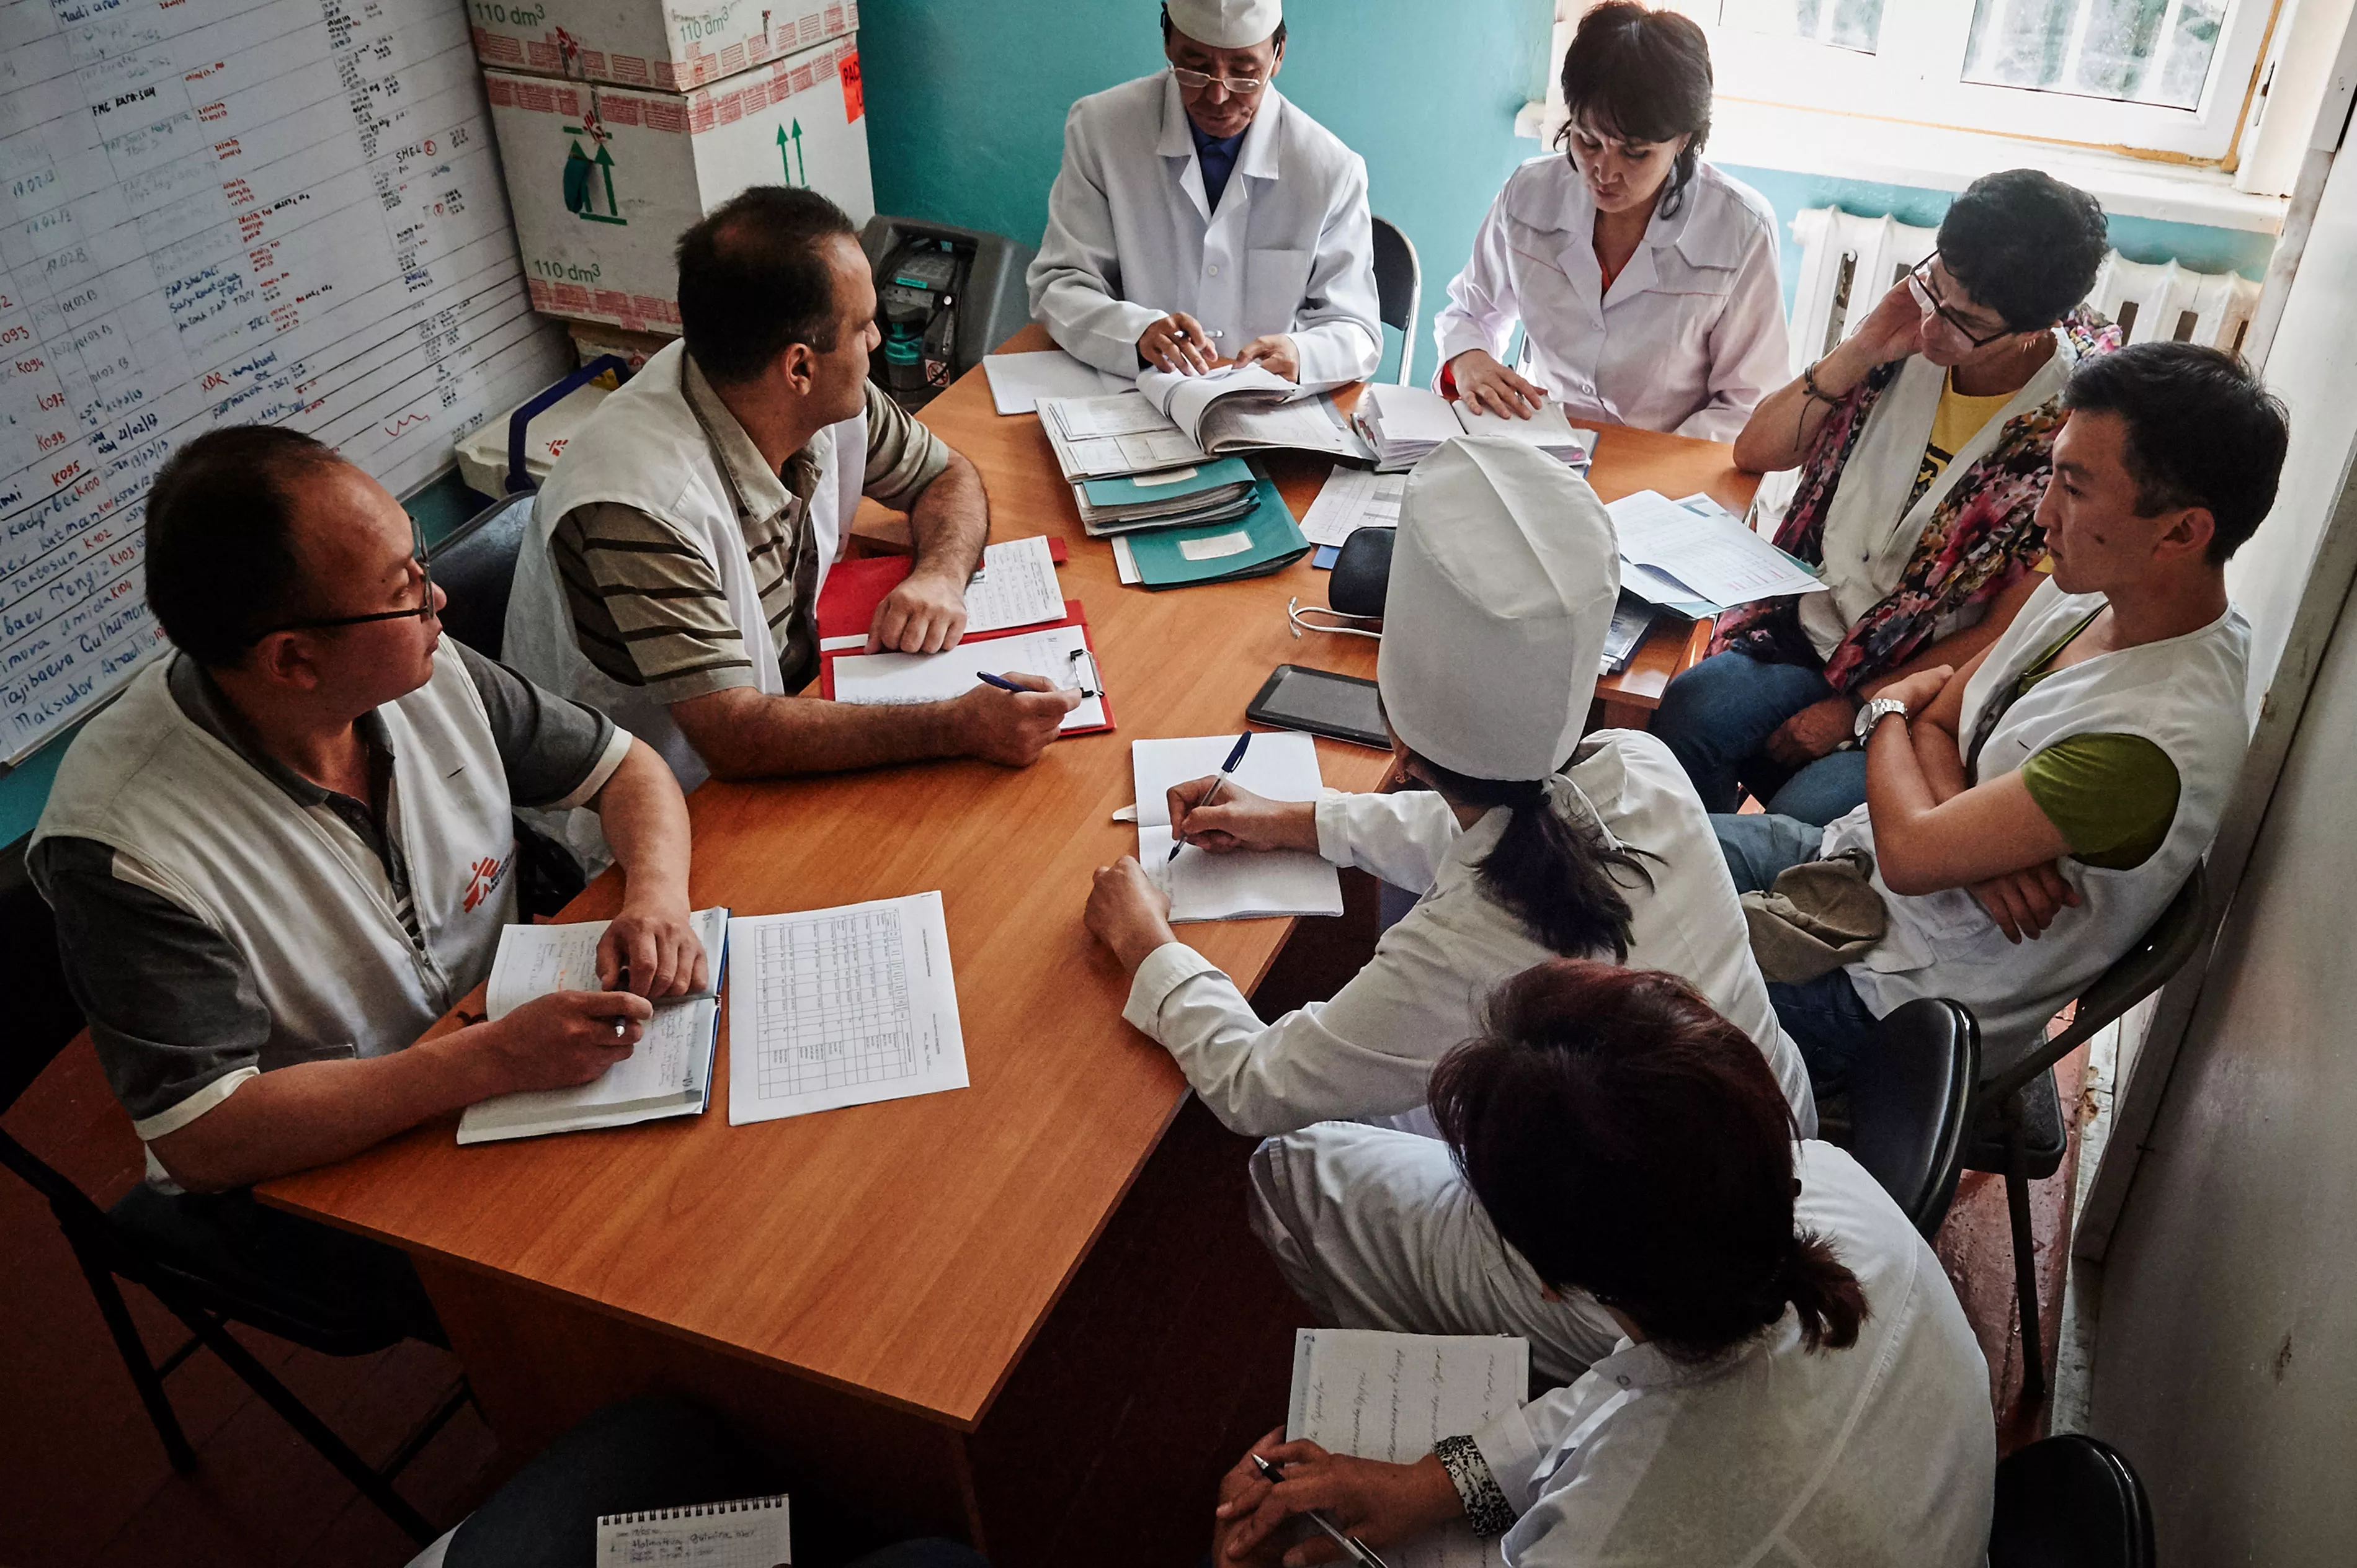 The highest TB rates in Kyrgyzstan are in Kara-Suu district, Osh province. Weekly meeting of the local medical staff with the supervising and counselling staff of MSF. Case review before medical round.